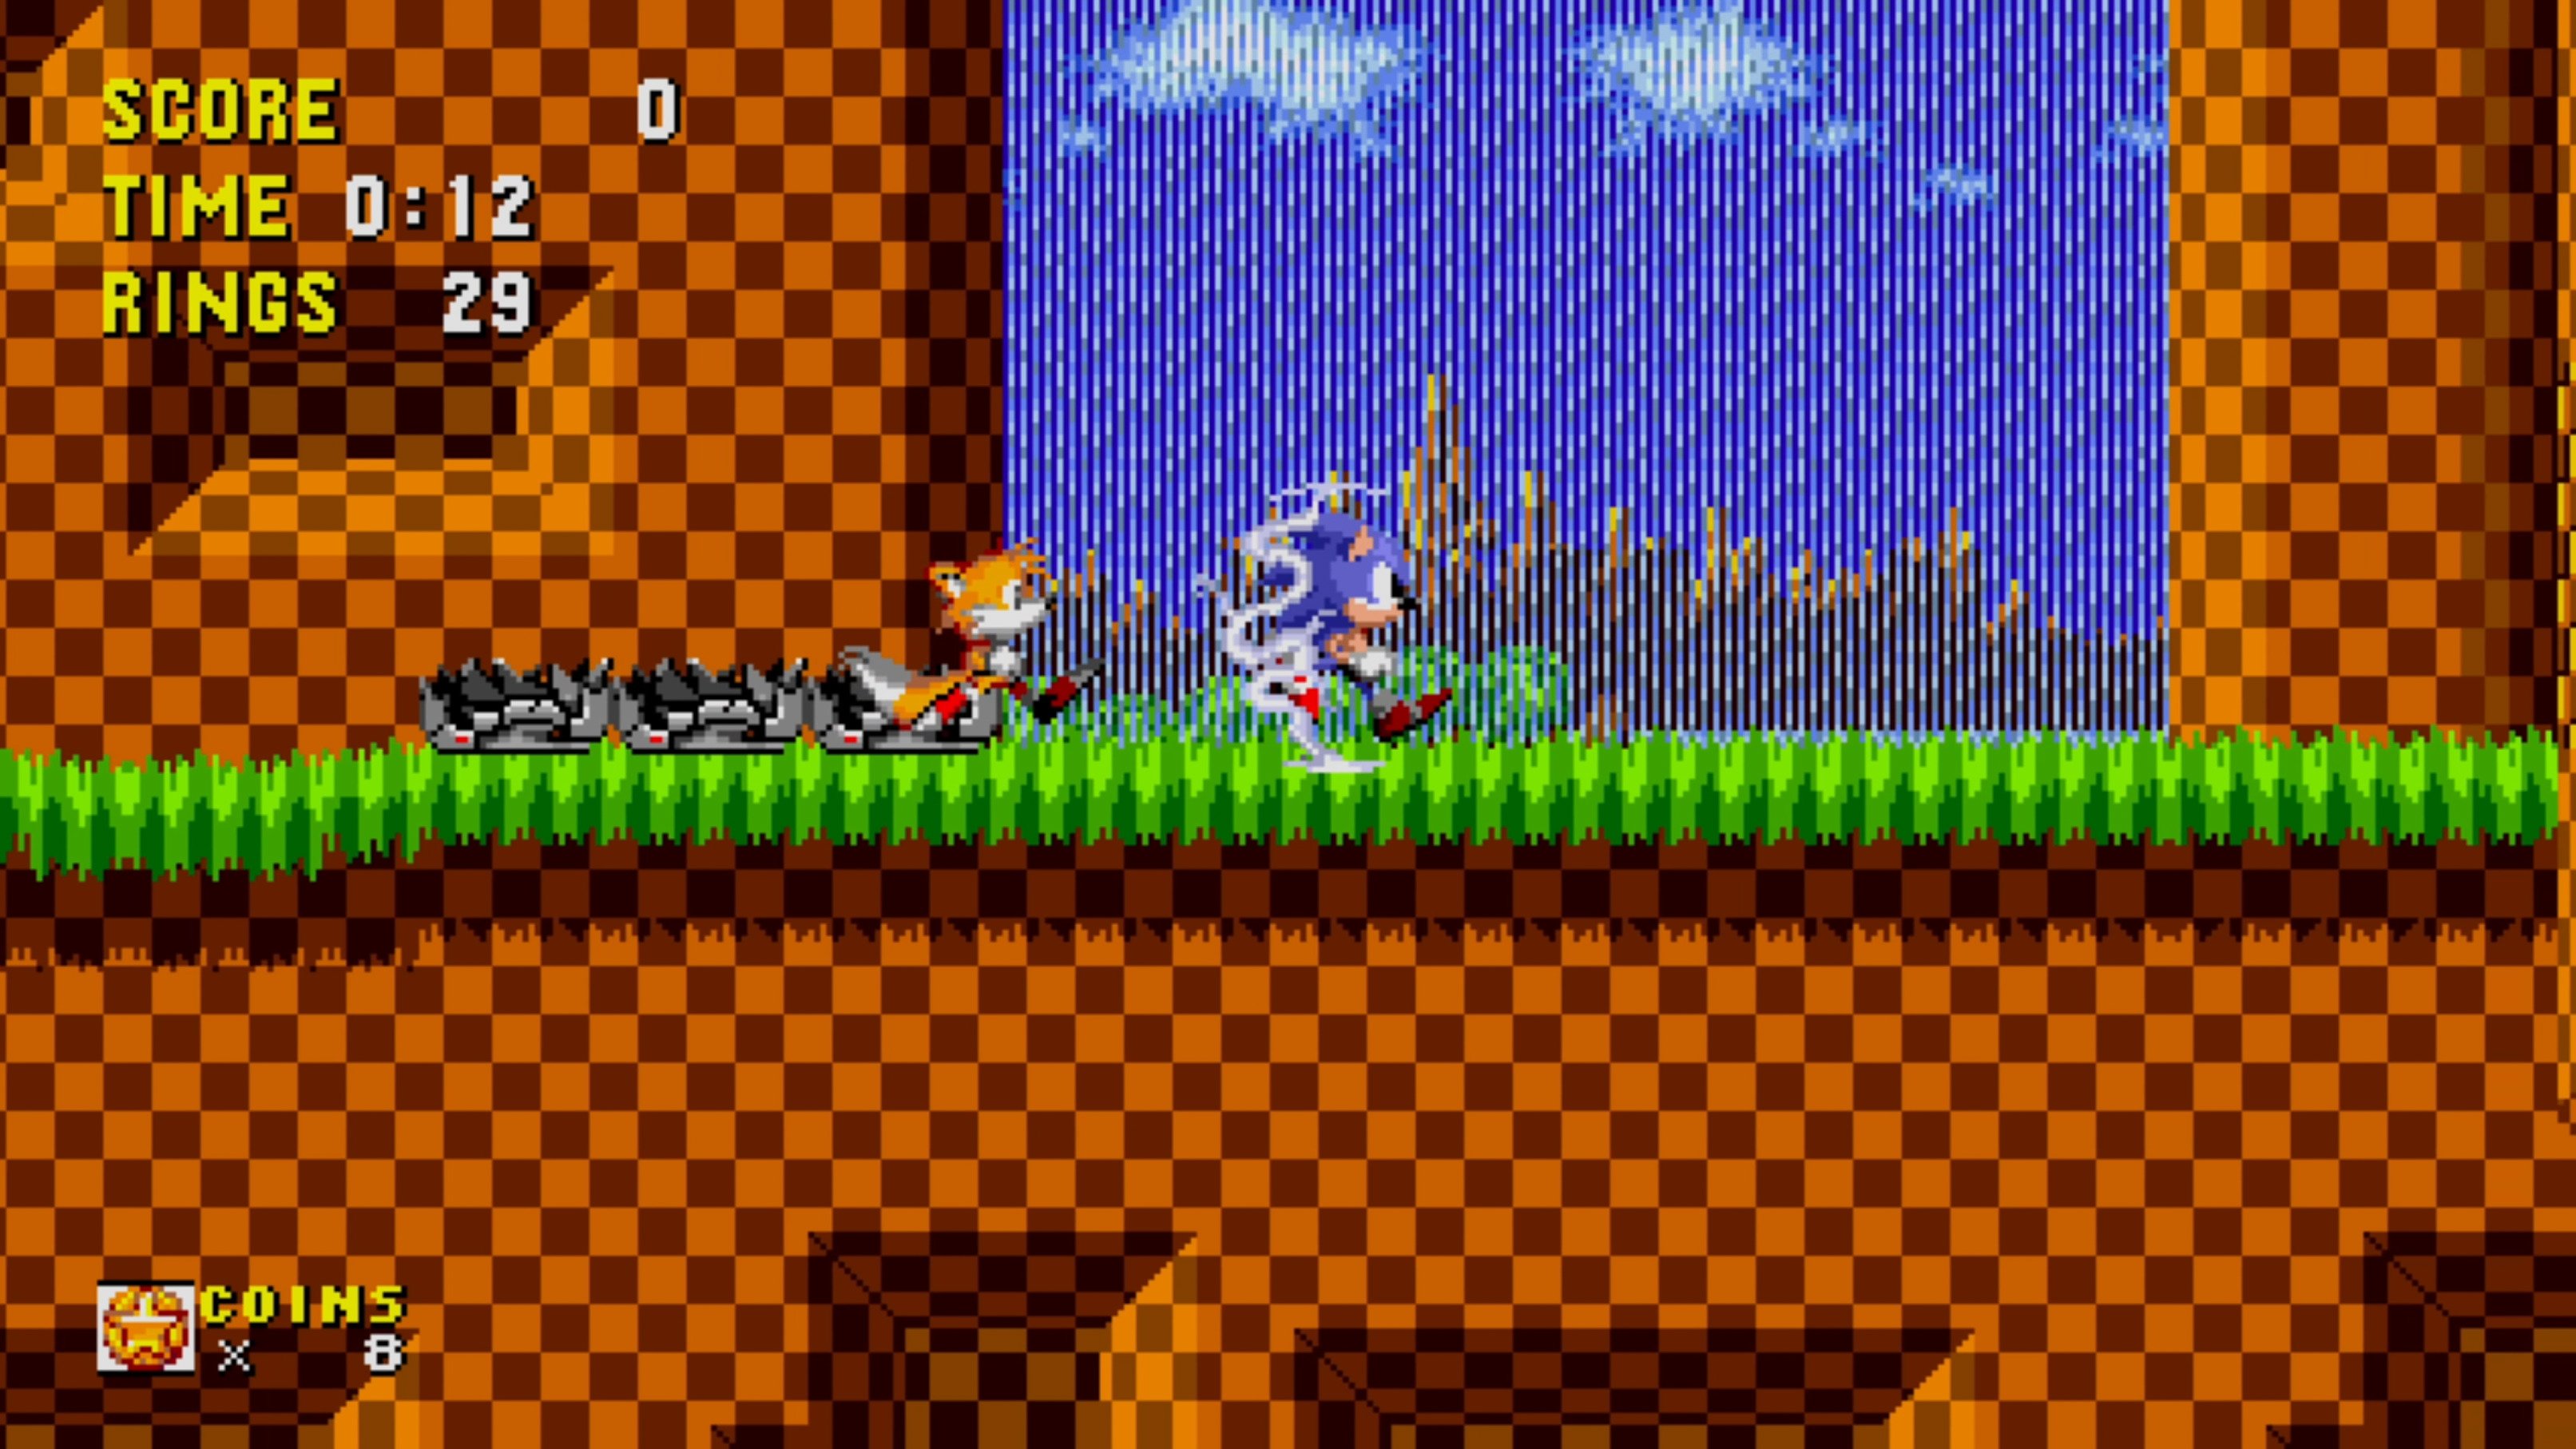 Sonic 3 – EXE Edition (Sonic Hack)